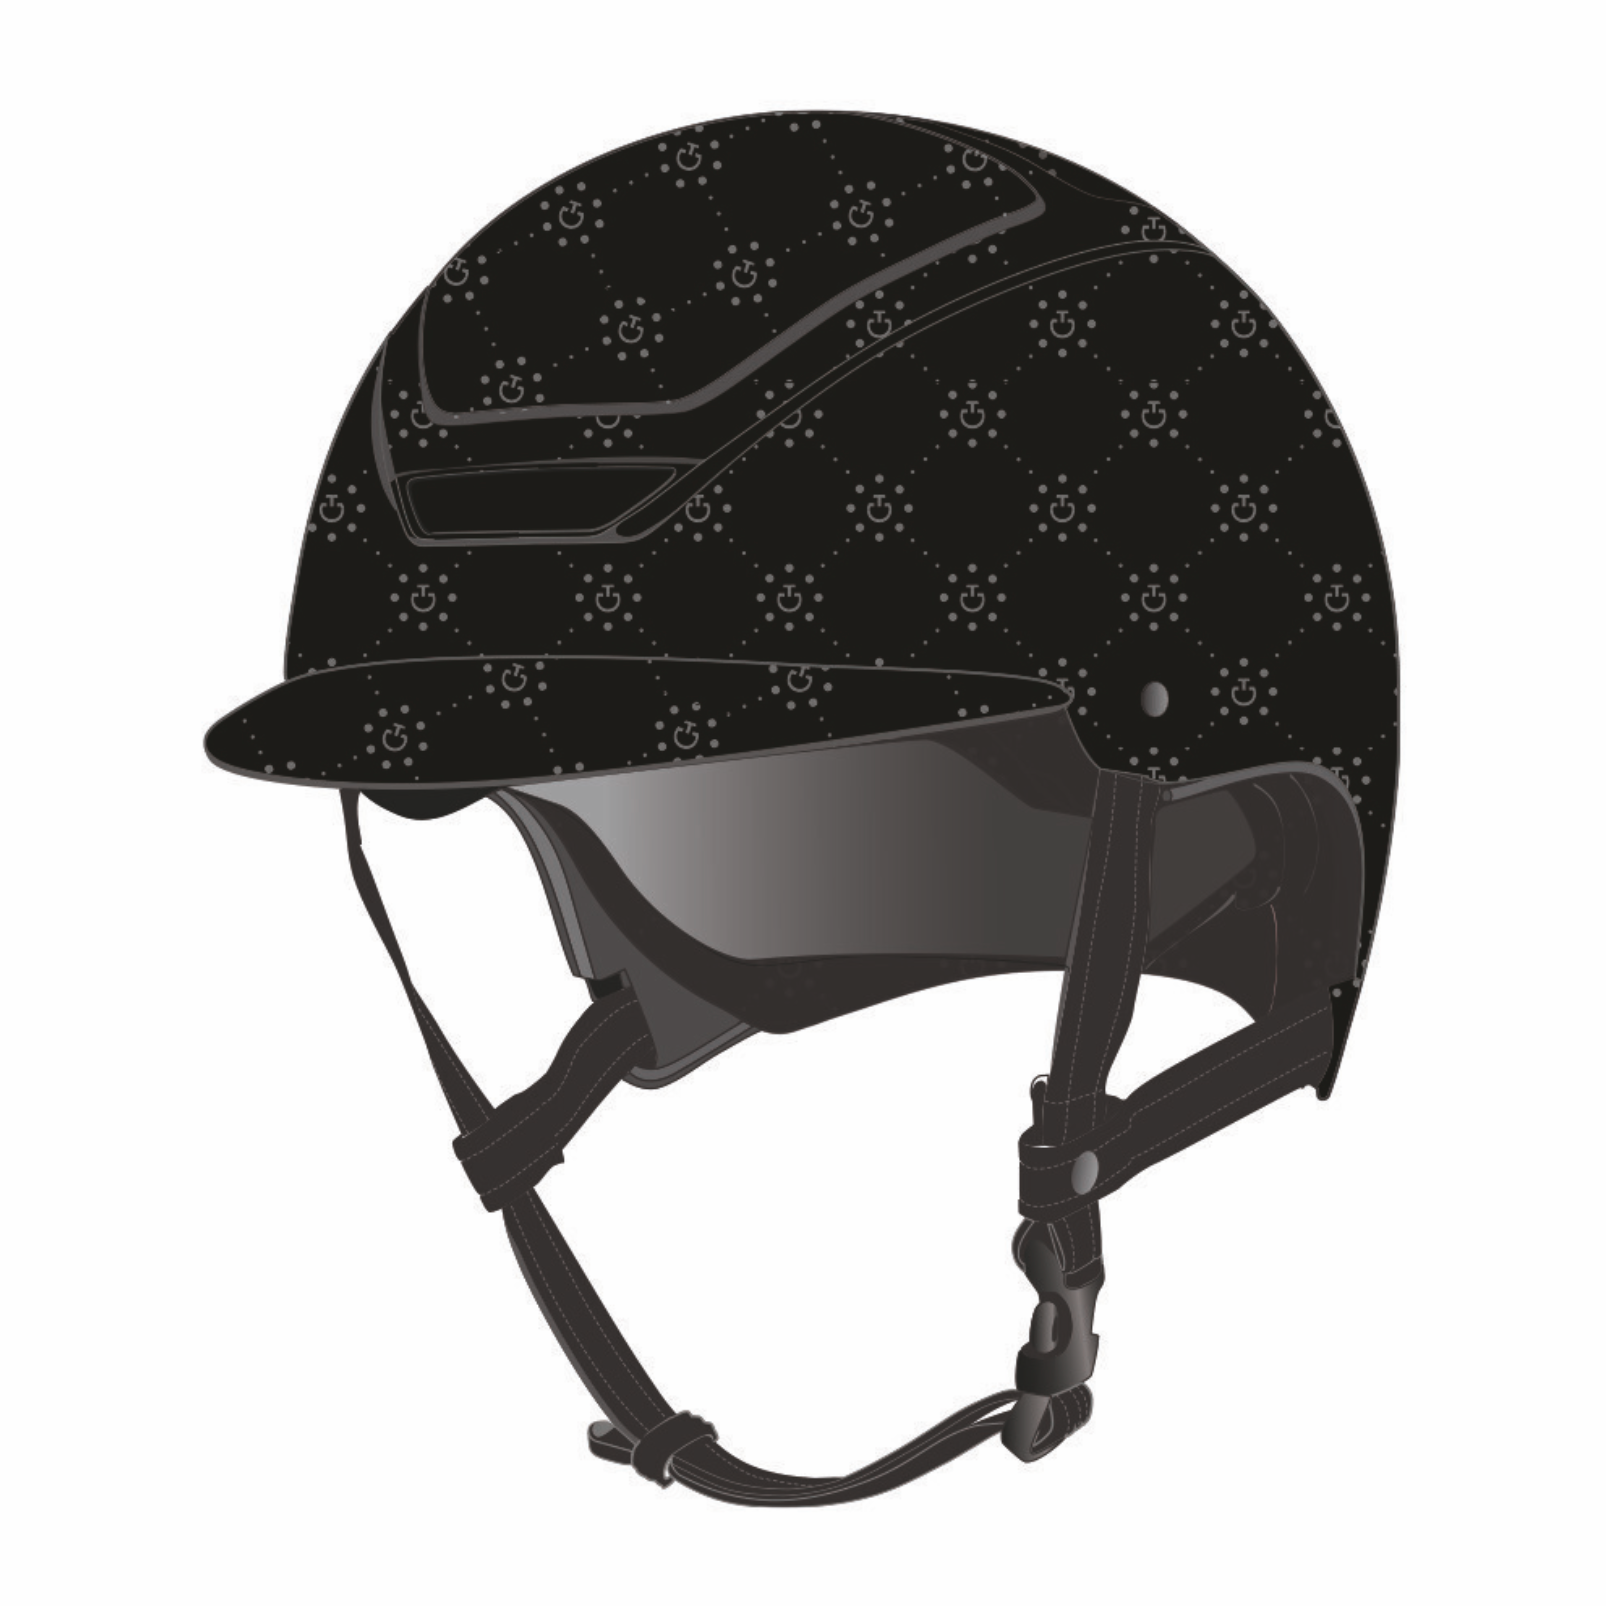 Riding helmet with velvet cover and CT logo decoration